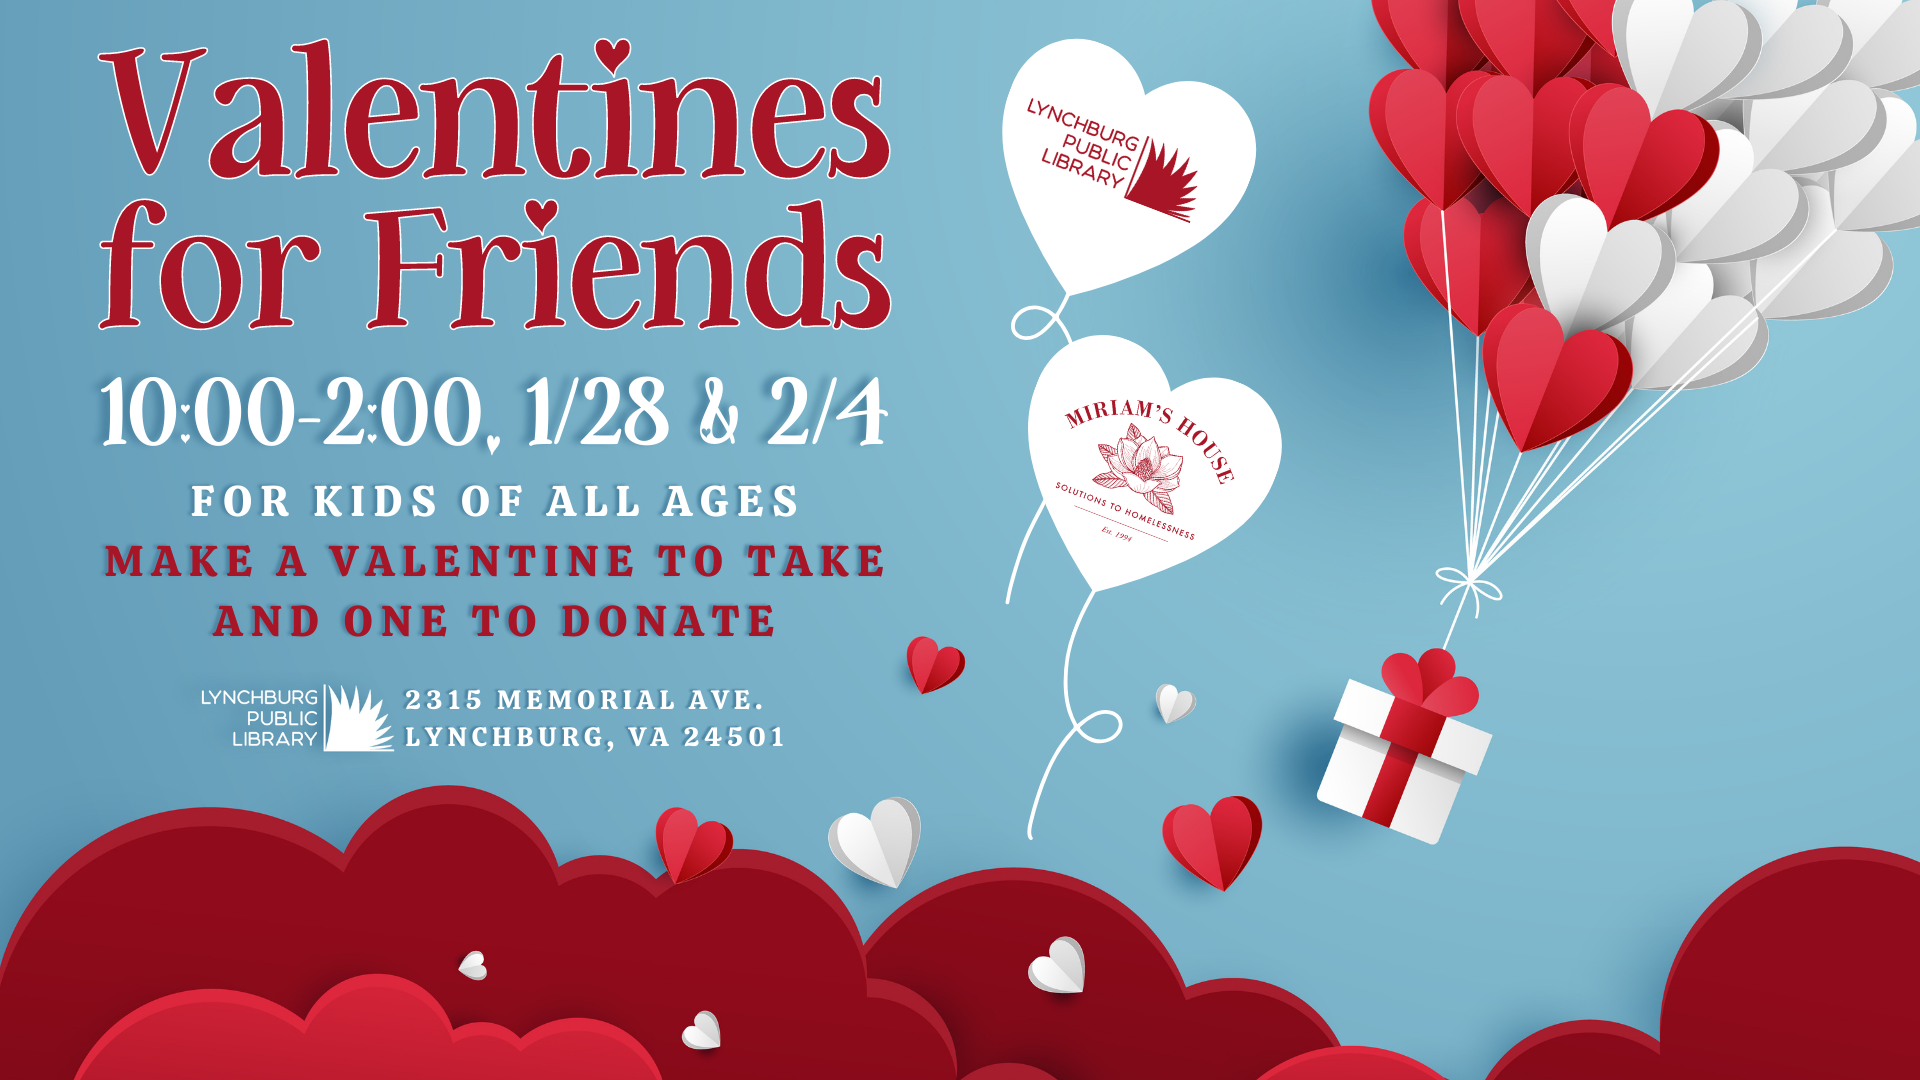 Valentines for Friends logo